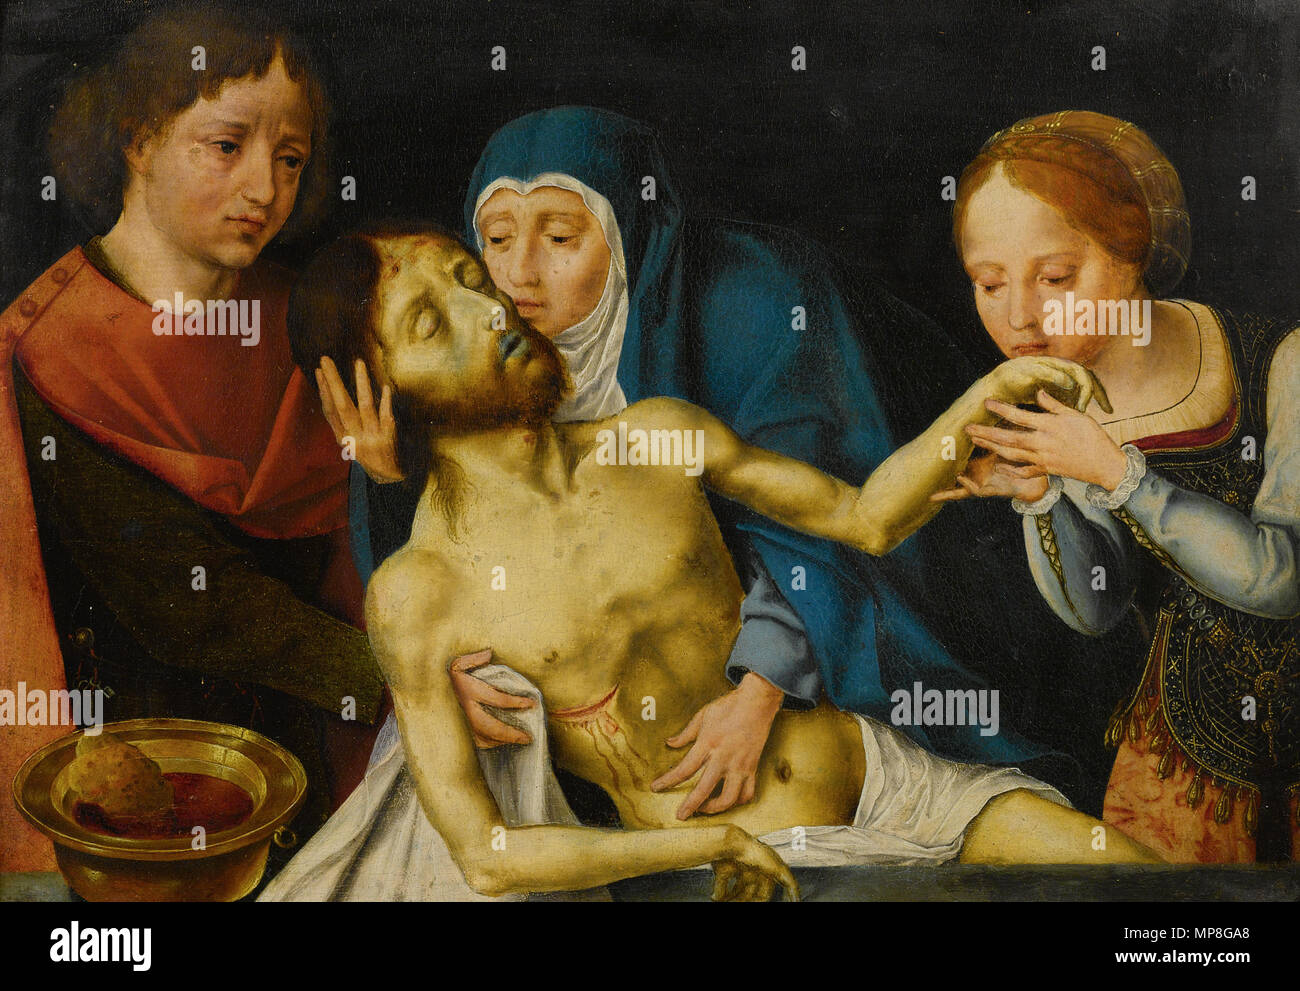 . The Lamentation of Christ. 16th century.   Follower of Joos van Cleve  (circa 1485 – 1540/1541)     Alternative names Joos van der Beke, Joos van der Beken, Joos van Cleef, Master of the Death of the Virgin  Description Flemish painter and draughtsman  Date of birth/death circa 1485 between 10 November 1540 and 13 April 1541  Location of birth/death Cleves (?) Antwerp  Work location Kalkar (circa 1505–1508), Bruges (1507–1511), Antwerp (1511–1540), France (1529), London (1535–1536)  Authority control  : Q153472 VIAF: 69201794 ISNI: 0000 0001 1877 5443 ULAN: 500007799 LCCN: nr91022860 NLA: 35 Stock Photo